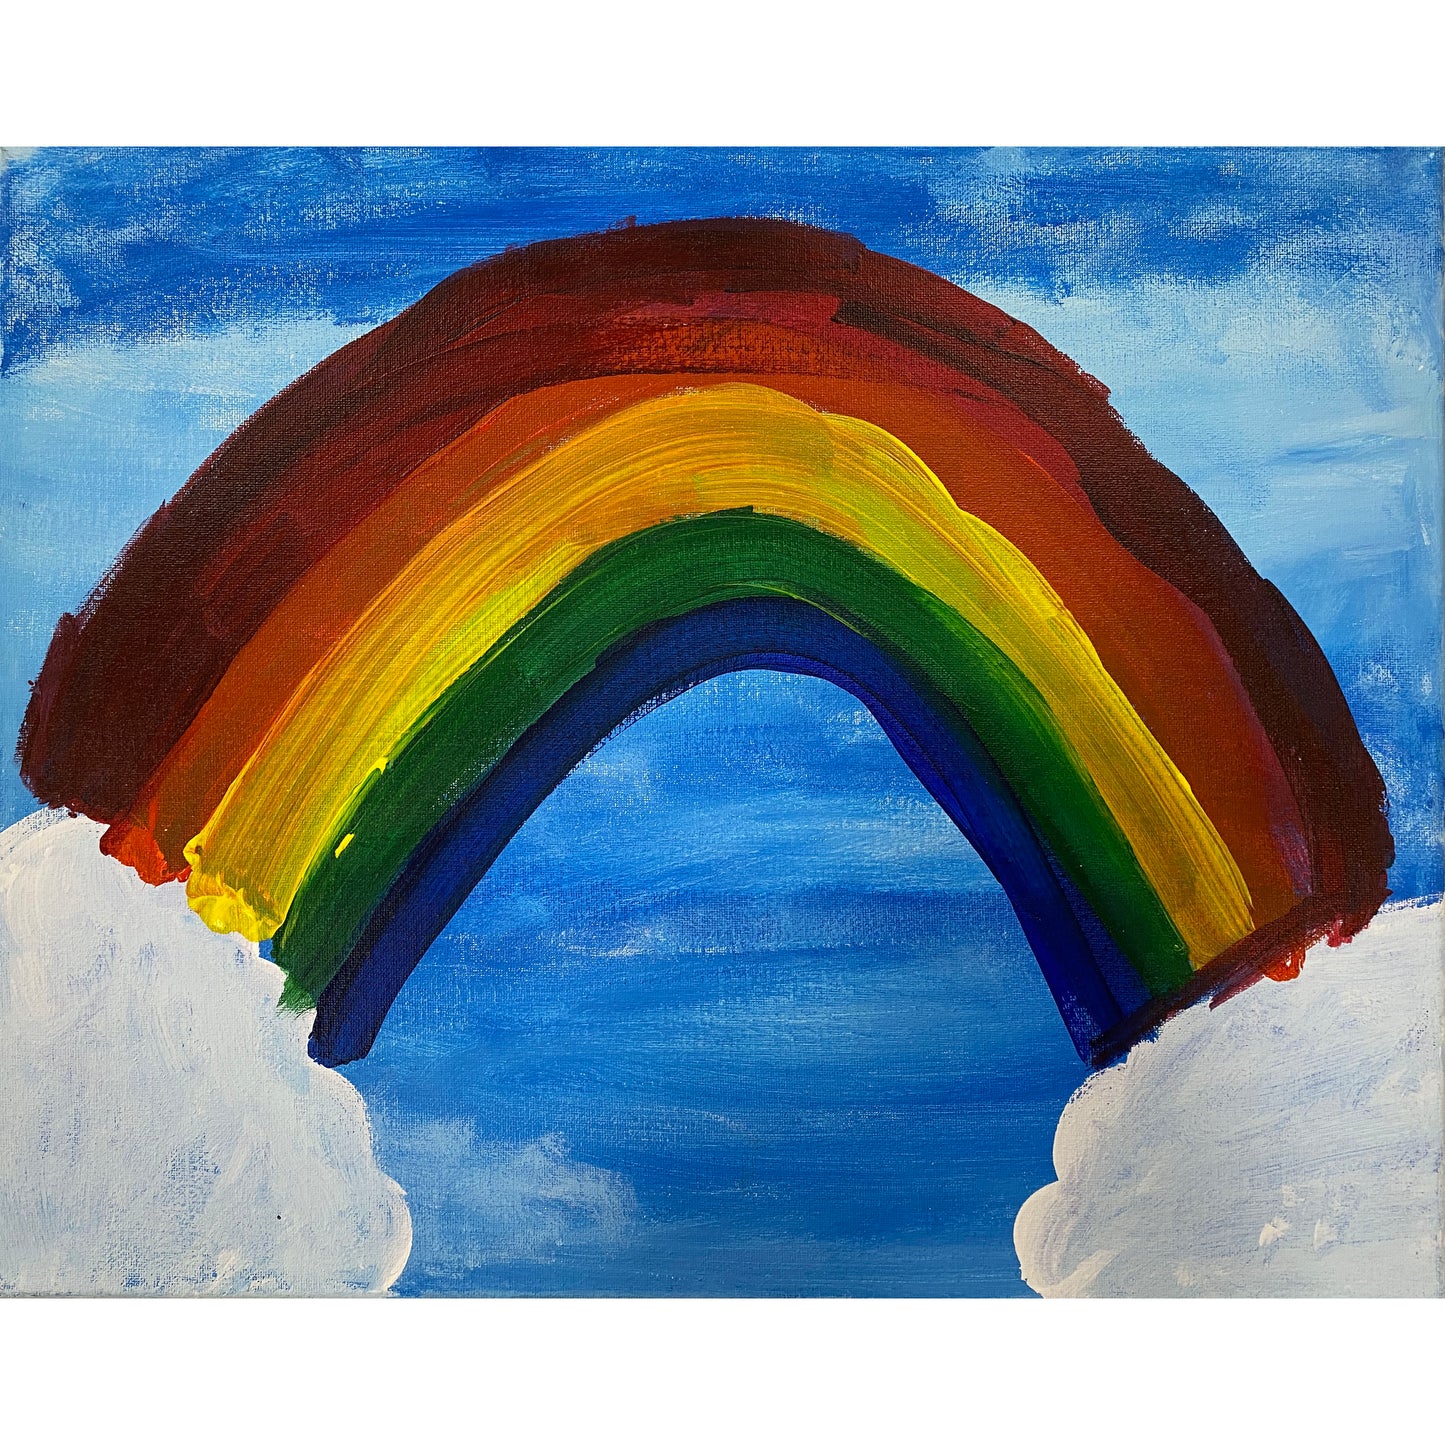 Acrylic Paint on Stretched Canvas, 20 x 16 Original Fine Art, Rainbow made by Emily Knoles